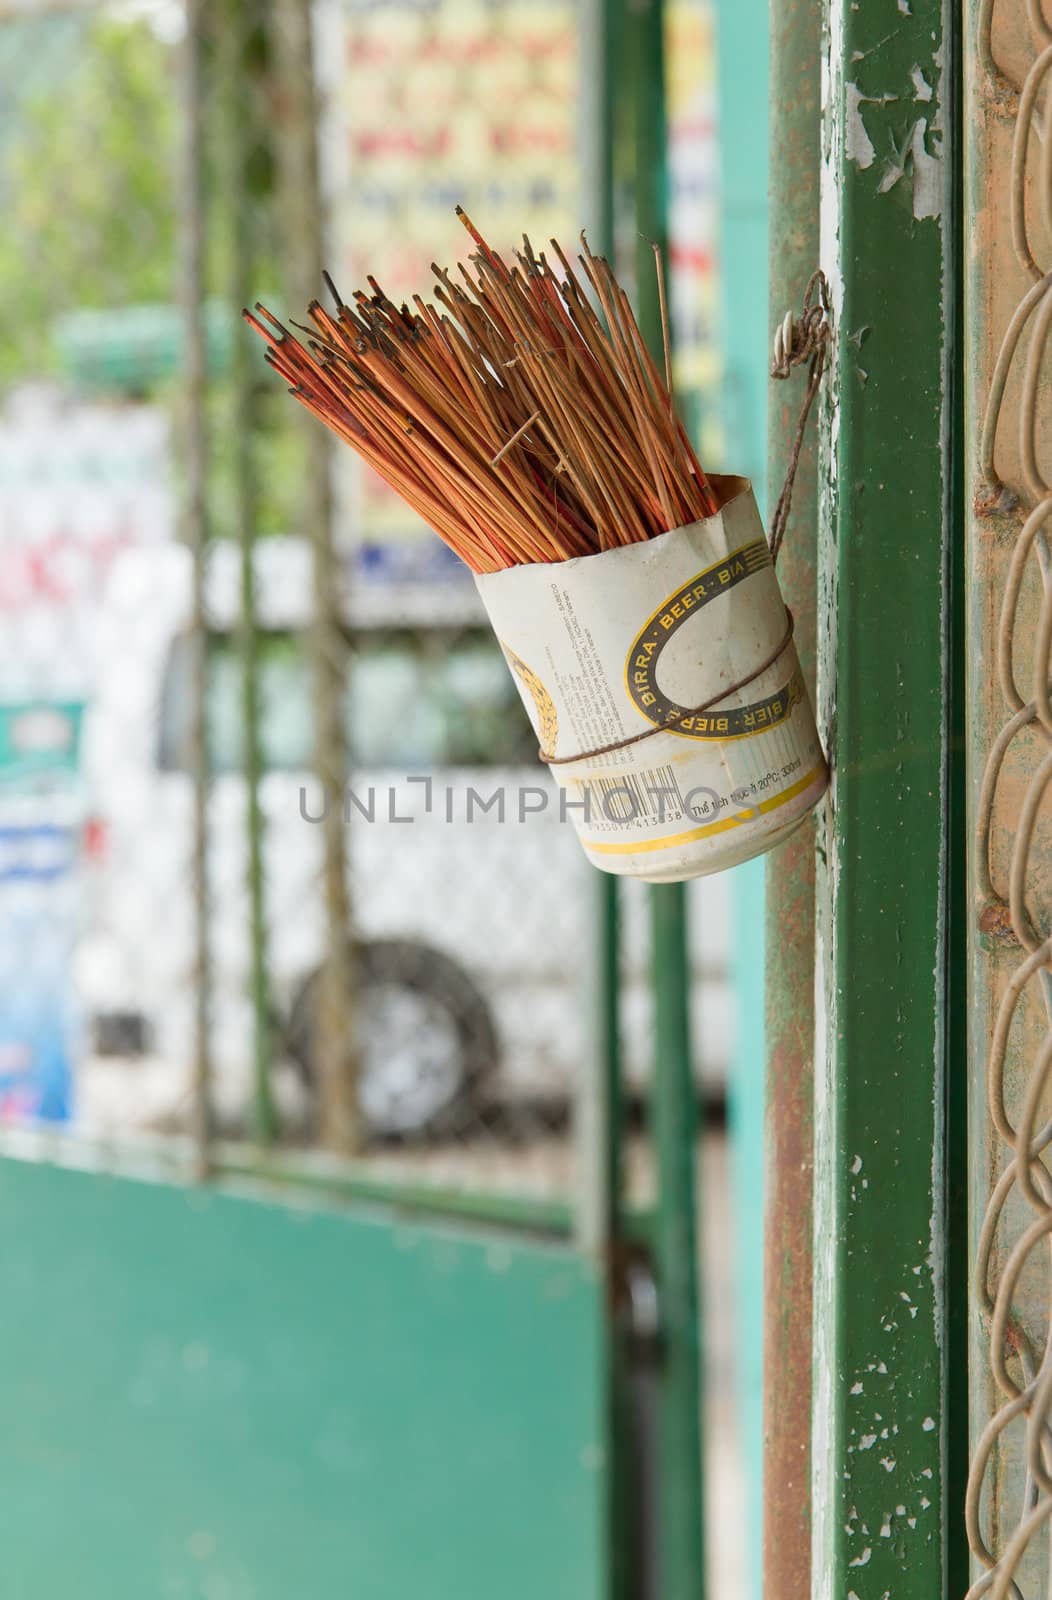 Incence sticks in an cut beer can on a wall, Vietnam